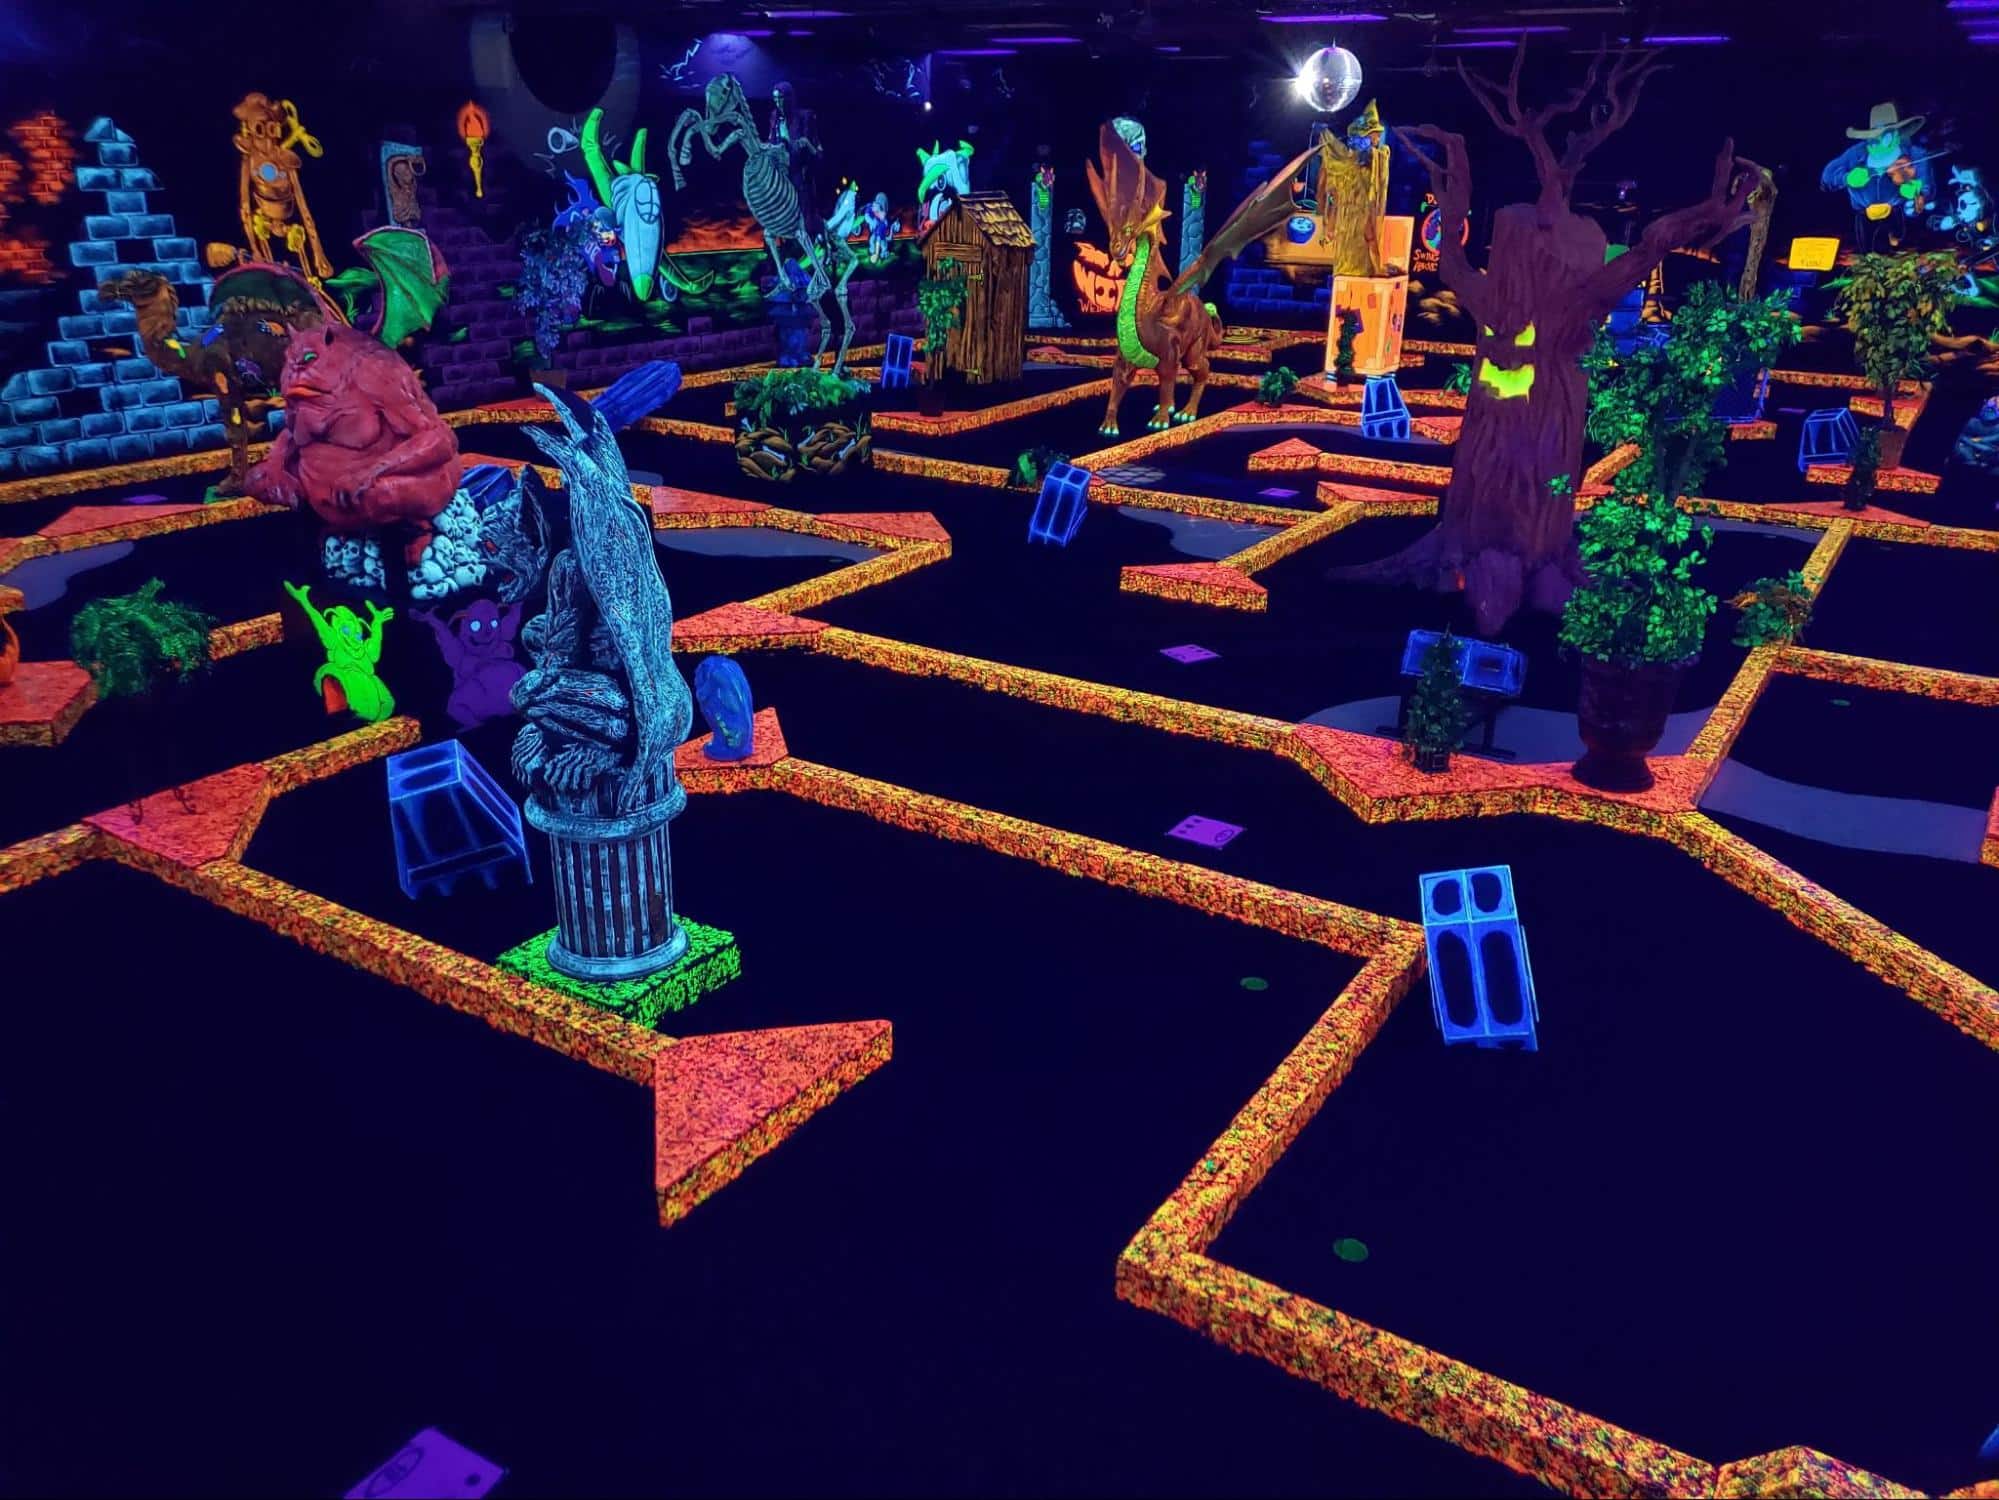 A glow-in-the-dark indoor mini golf course at Monster Mini Golf. 